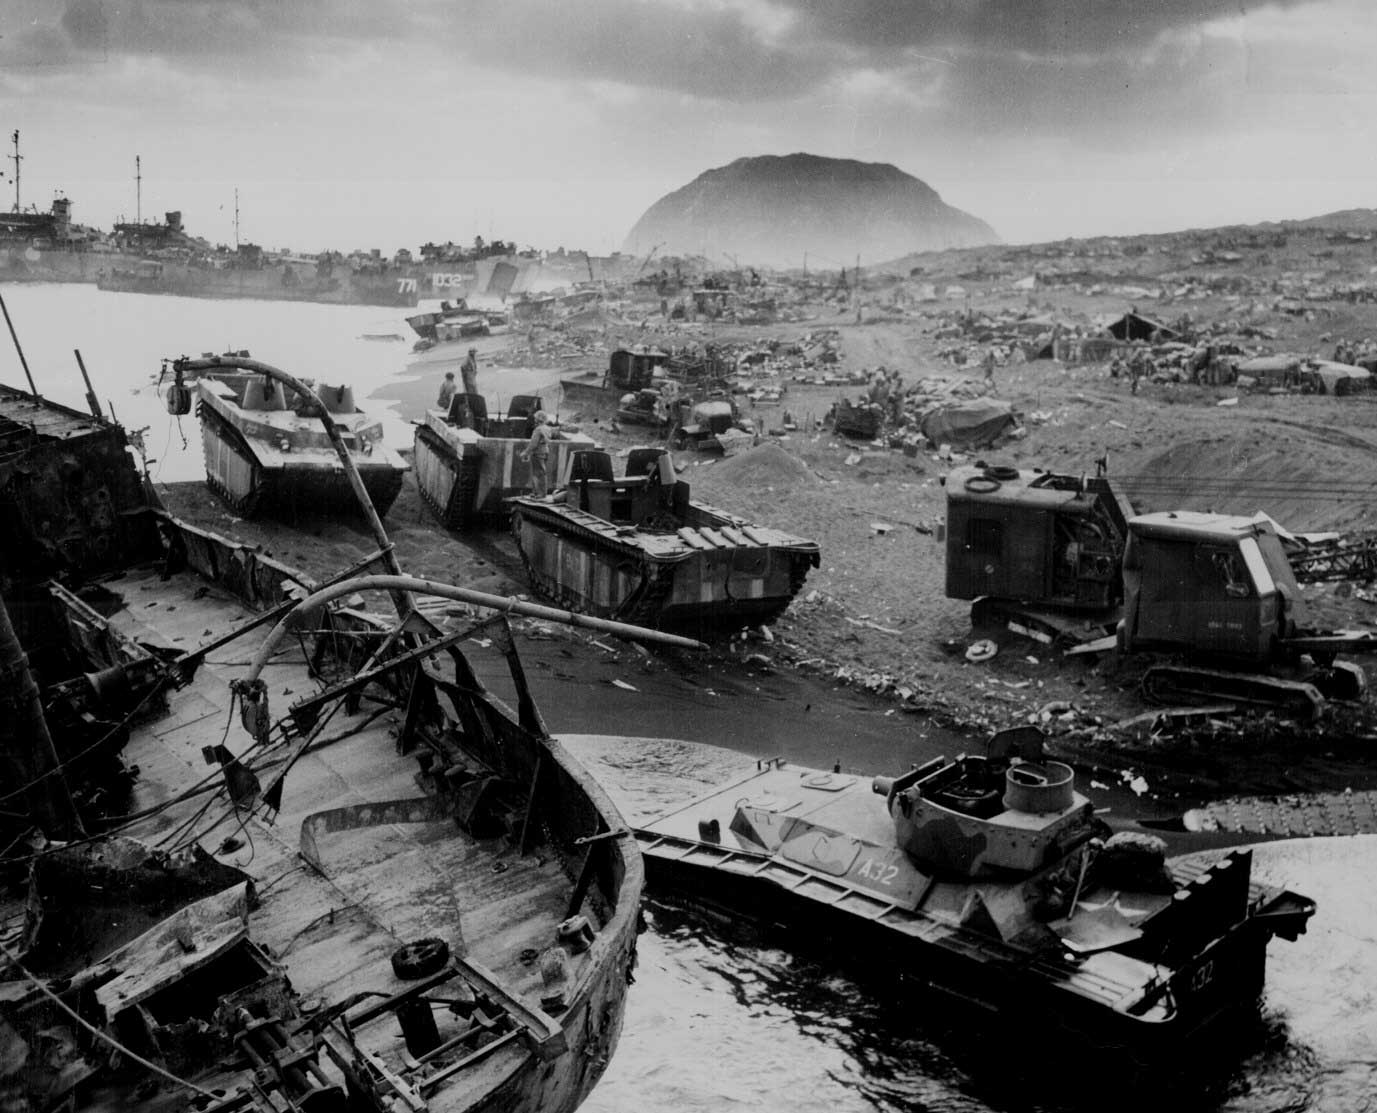 Destroyed American amtracs and other vehicles on beach of Iwo Jima, Japan, Feb-Mar 1945